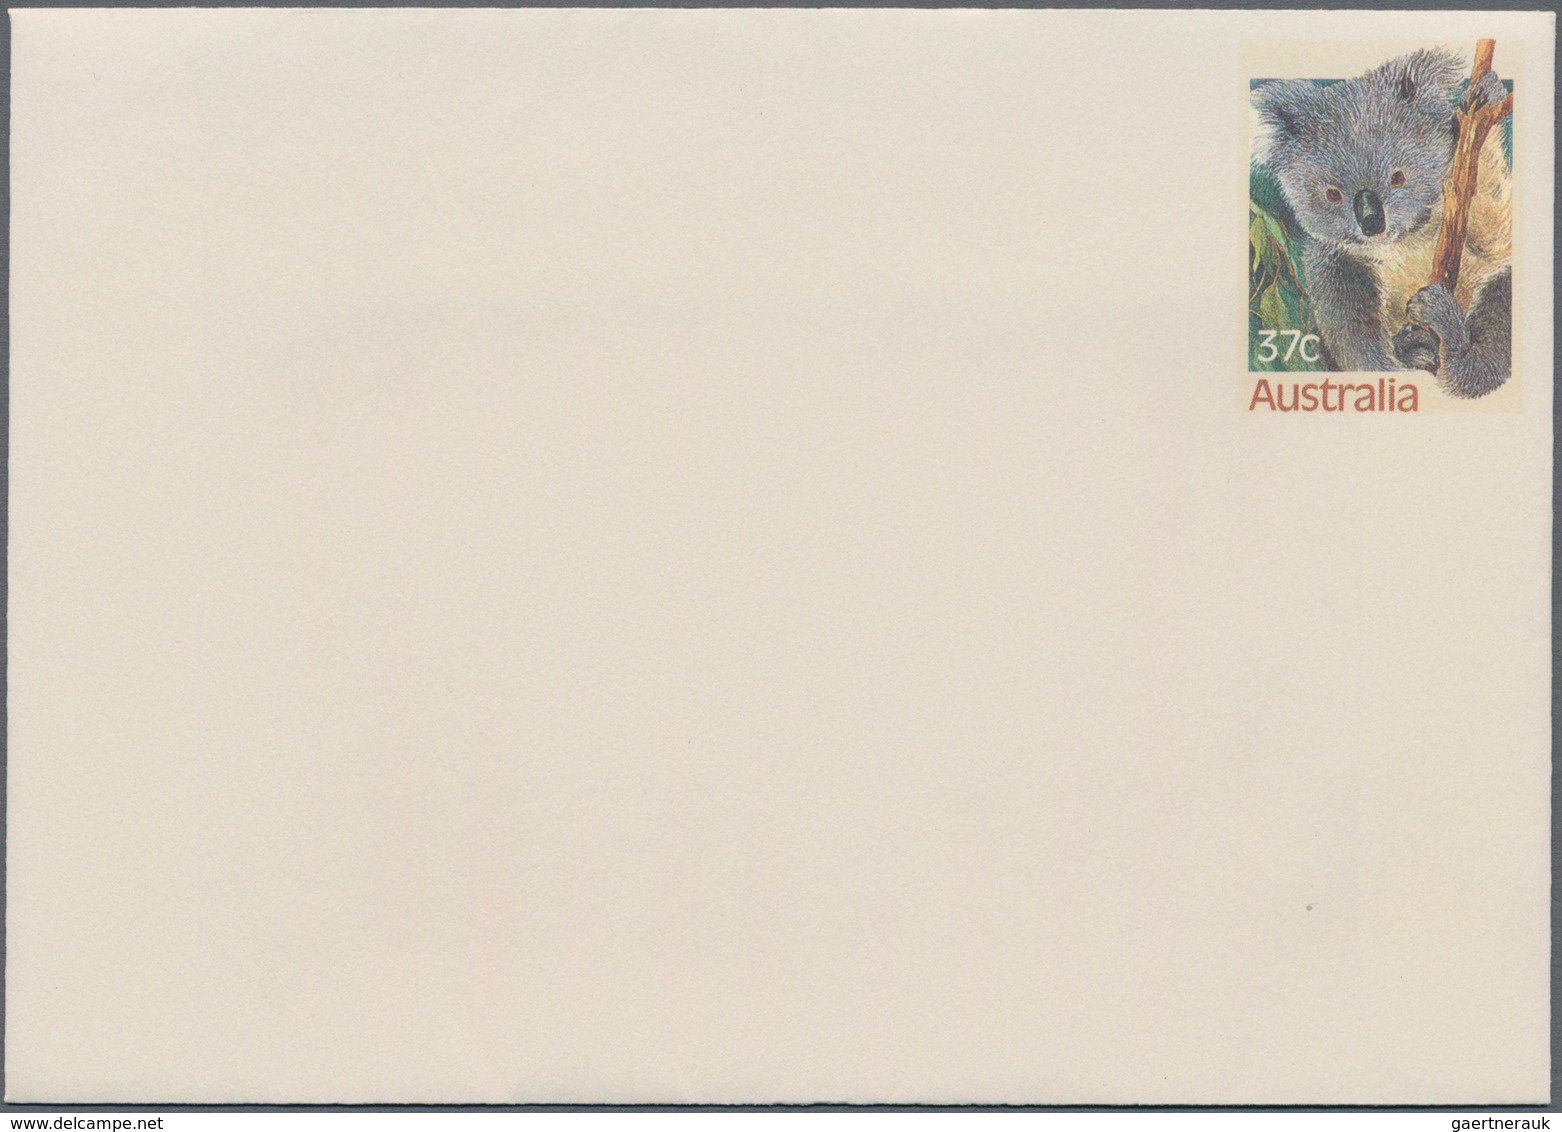 Australien - Ganzsachen: 1978/2000 (ca.), Accumulation With Approx. 1.800 Pre-Stamped Envelopes (PSE - Postal Stationery